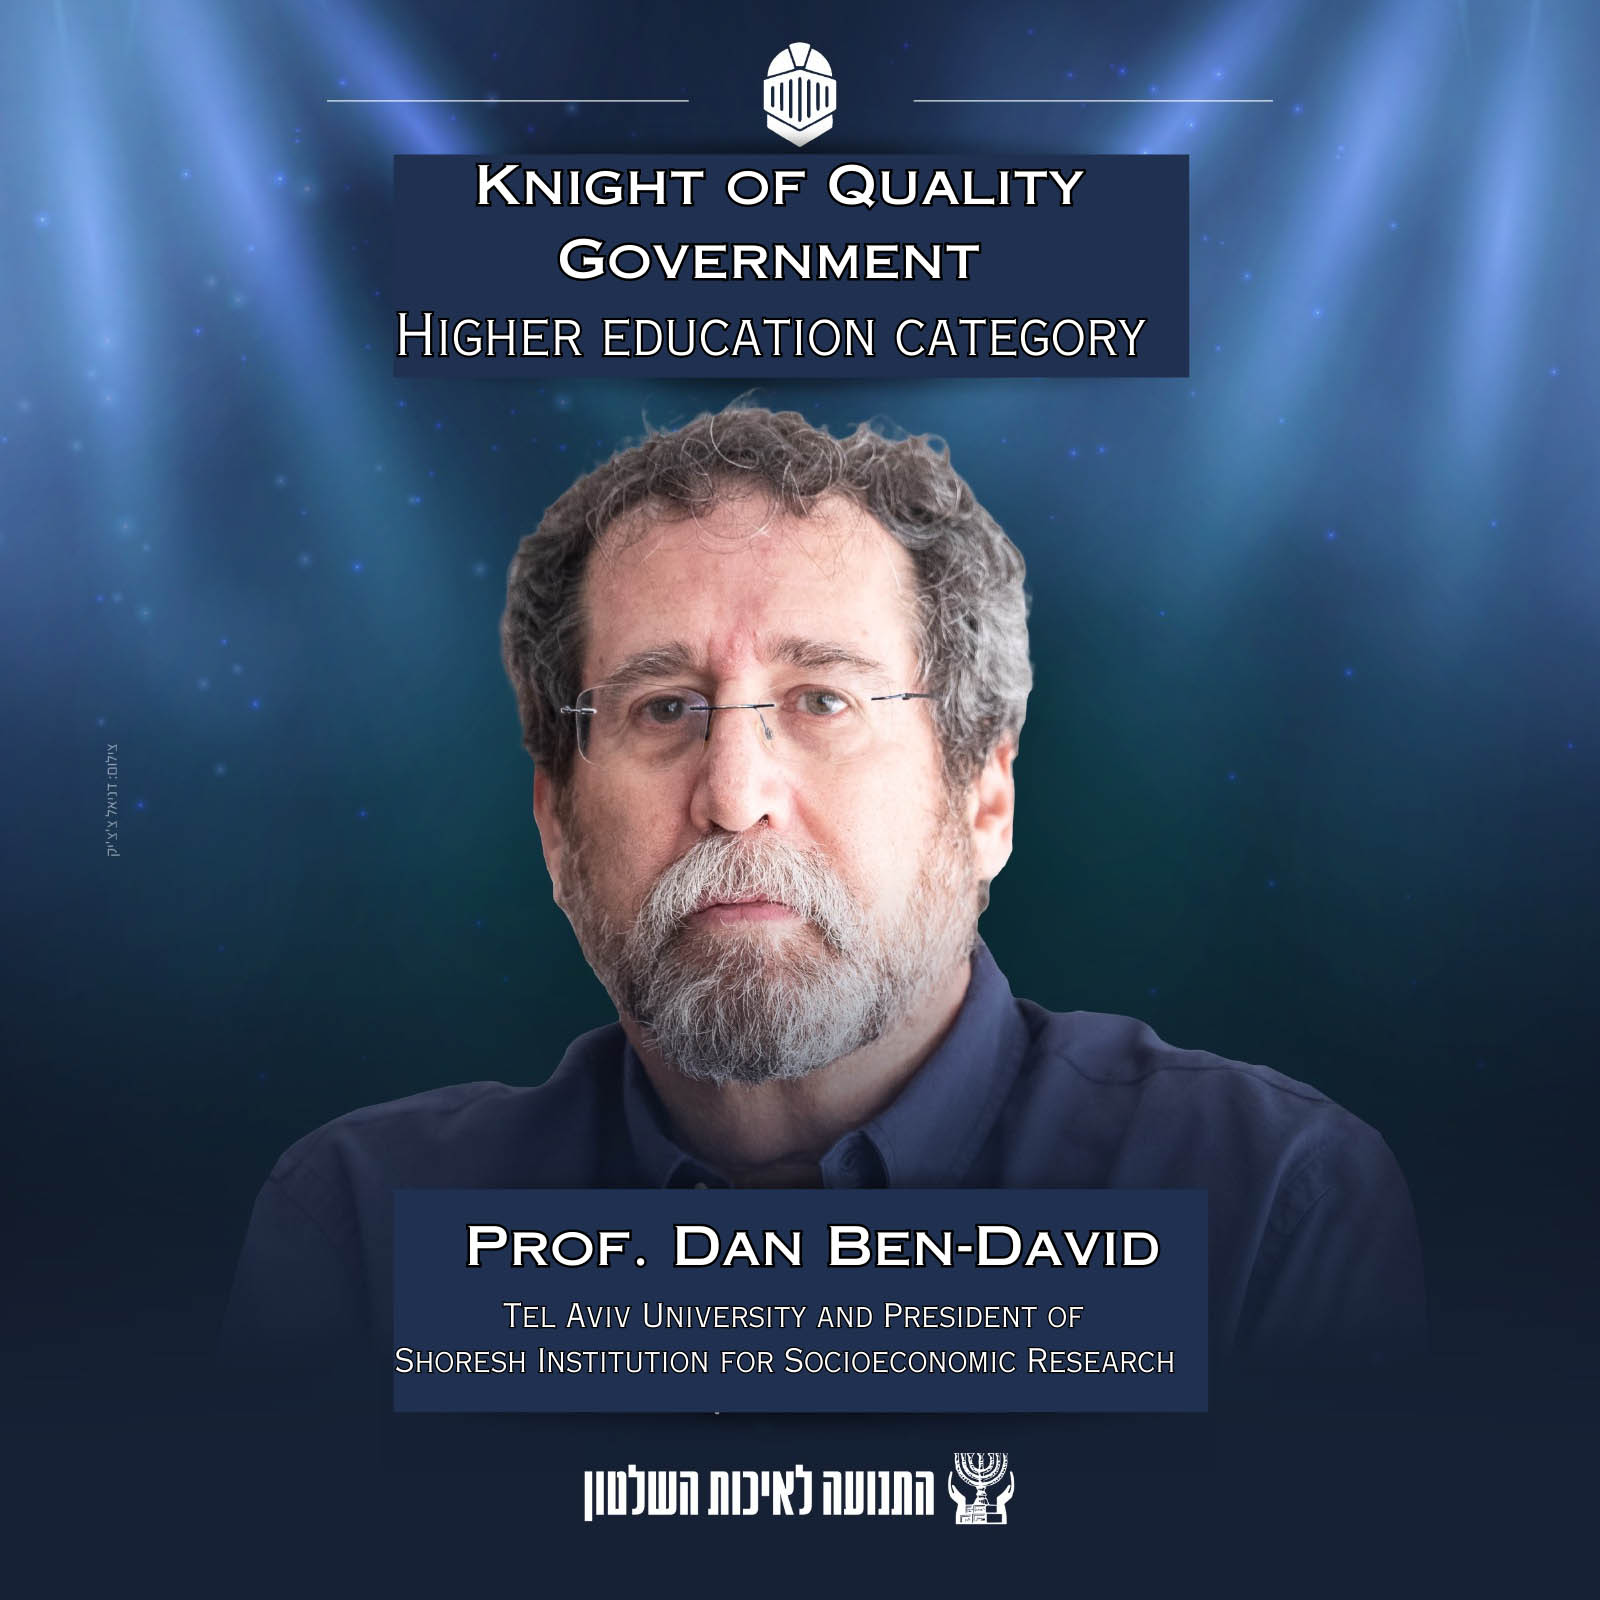 Knight of Quality Government Award